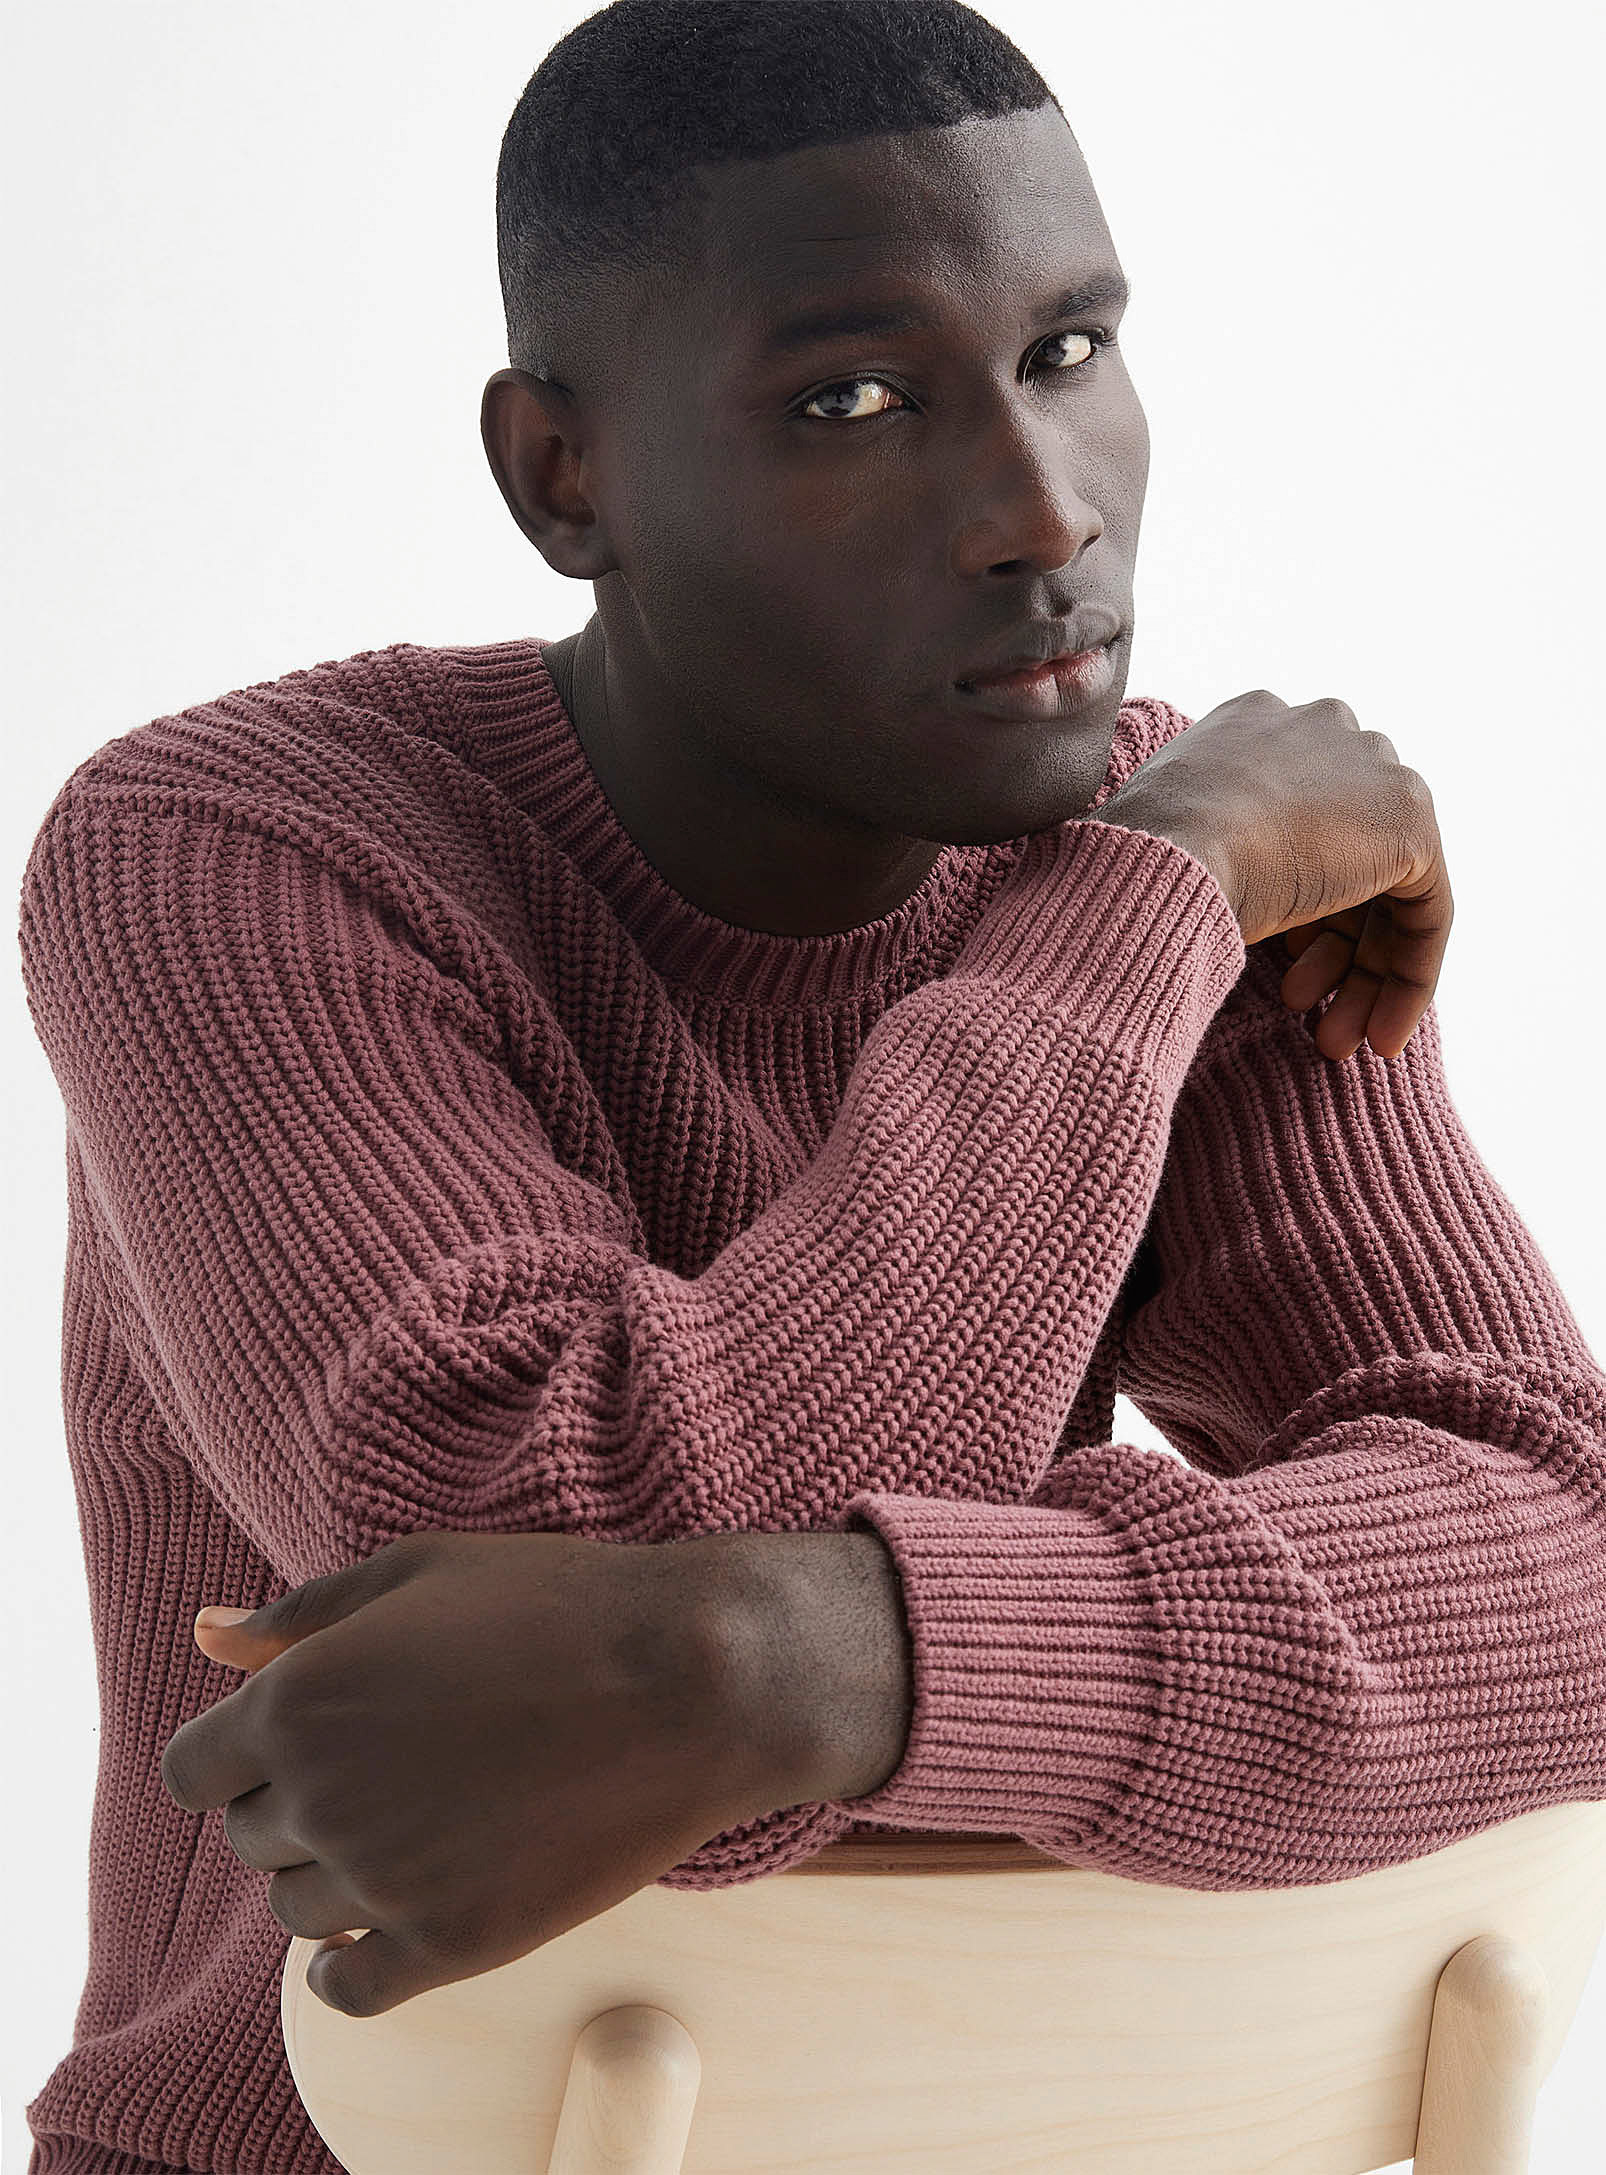 A person wearing a chunky knit sweater